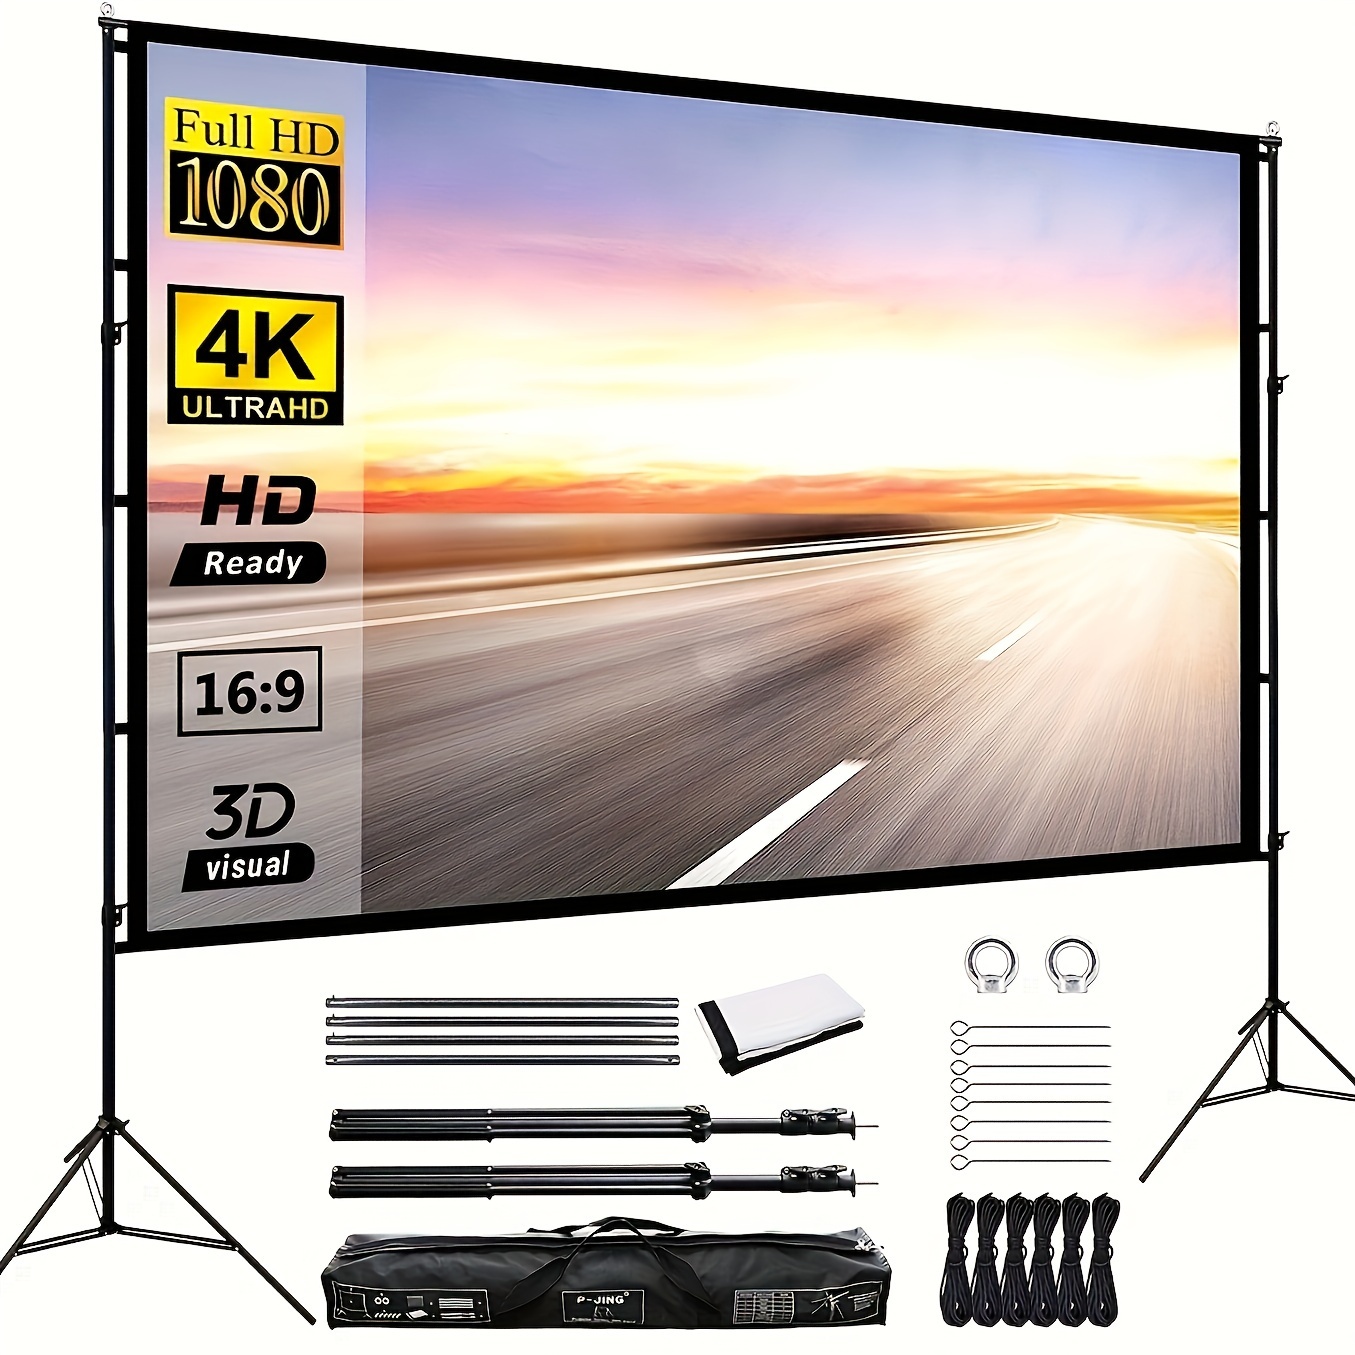 

150-inch Portable Projector Screen With Stand - 4k Hd, 16:9 Aspect Ratio For Indoor/outdoor Home Theater & Backyard Movies